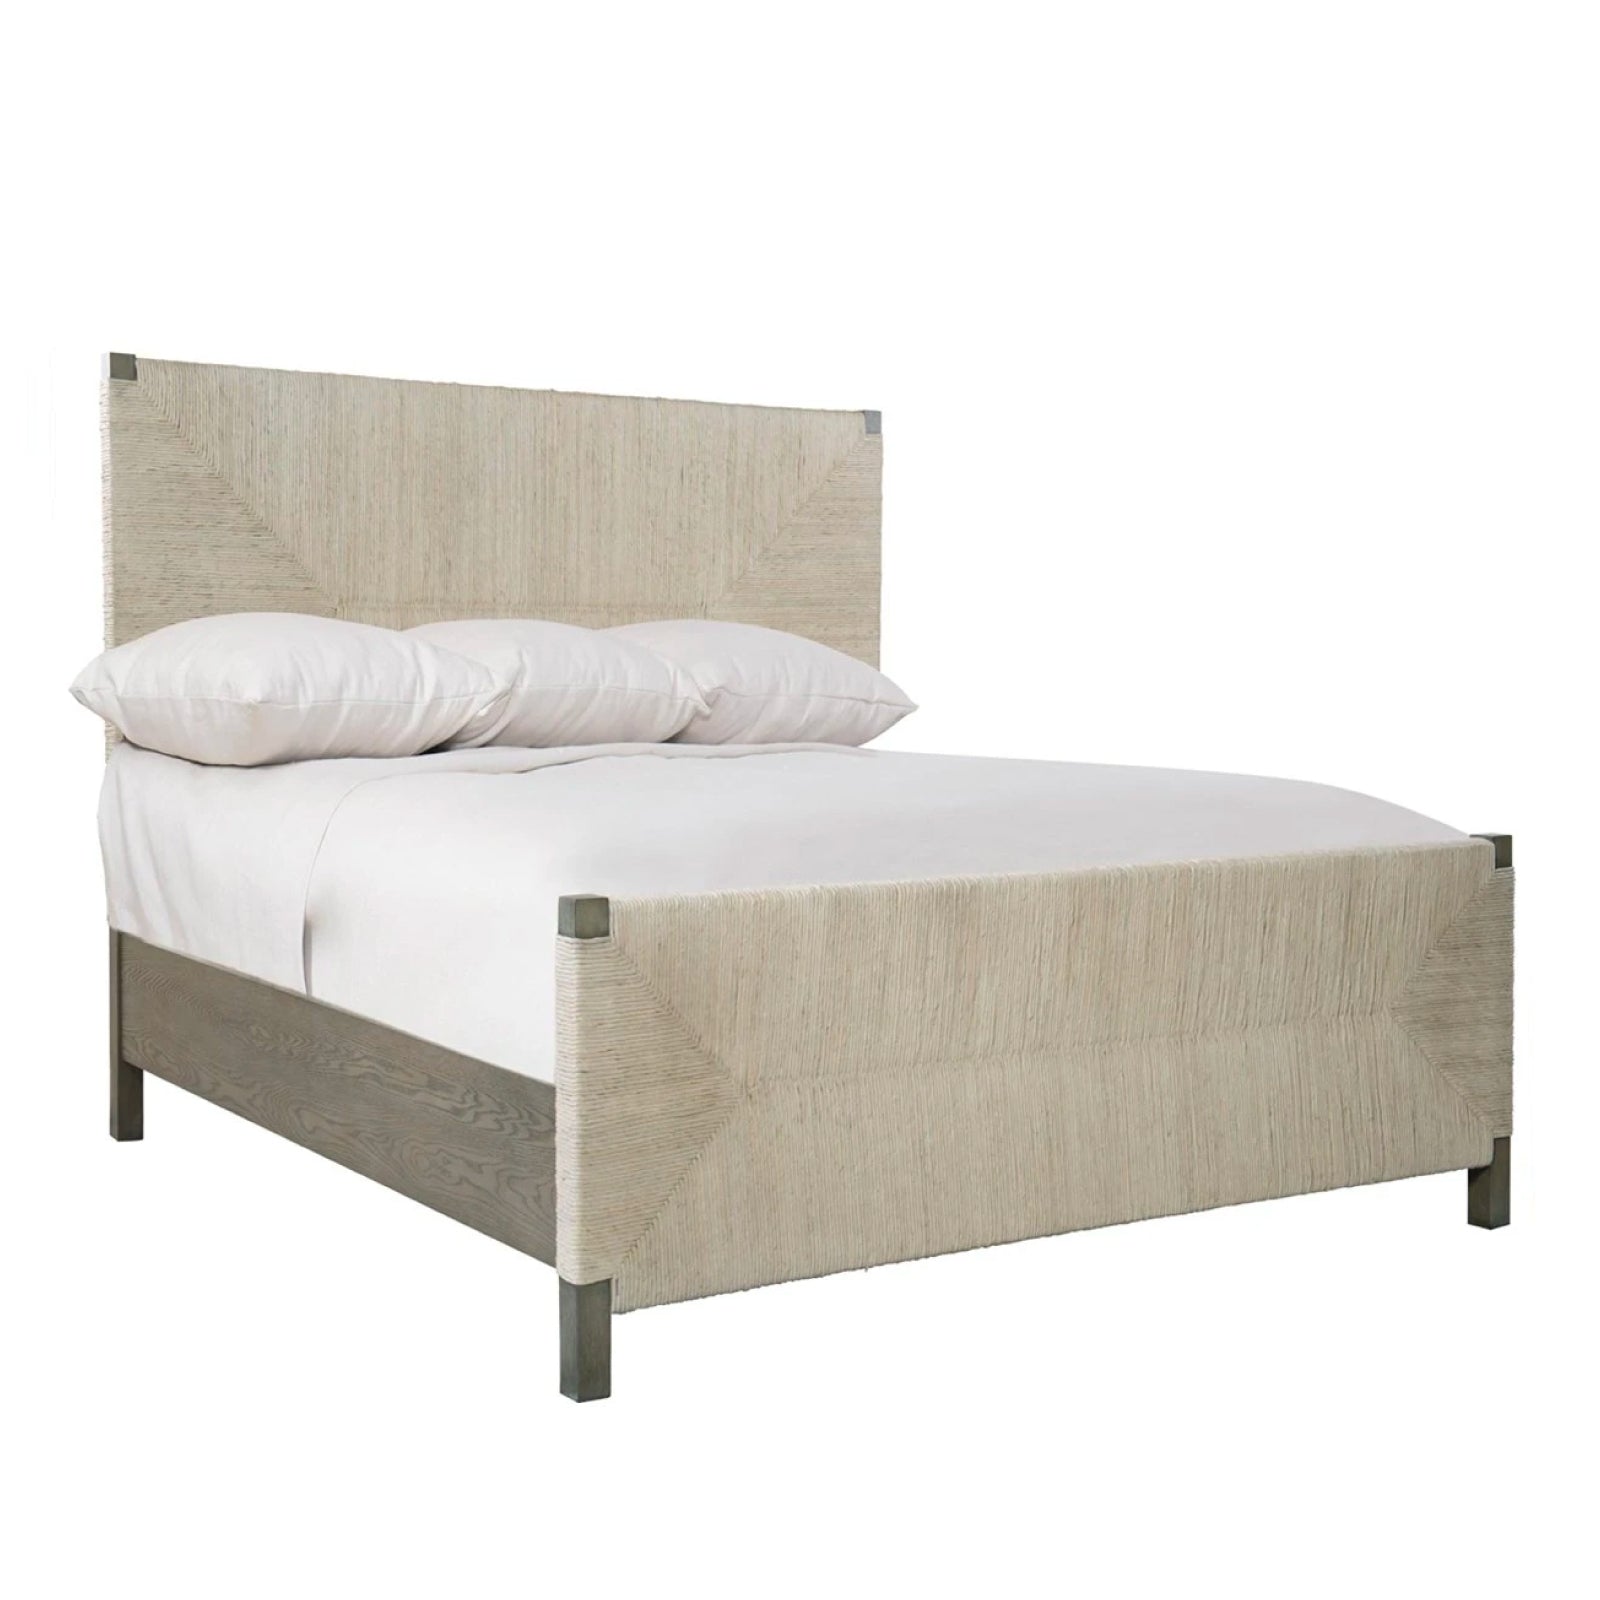 Spencer Woven Bed